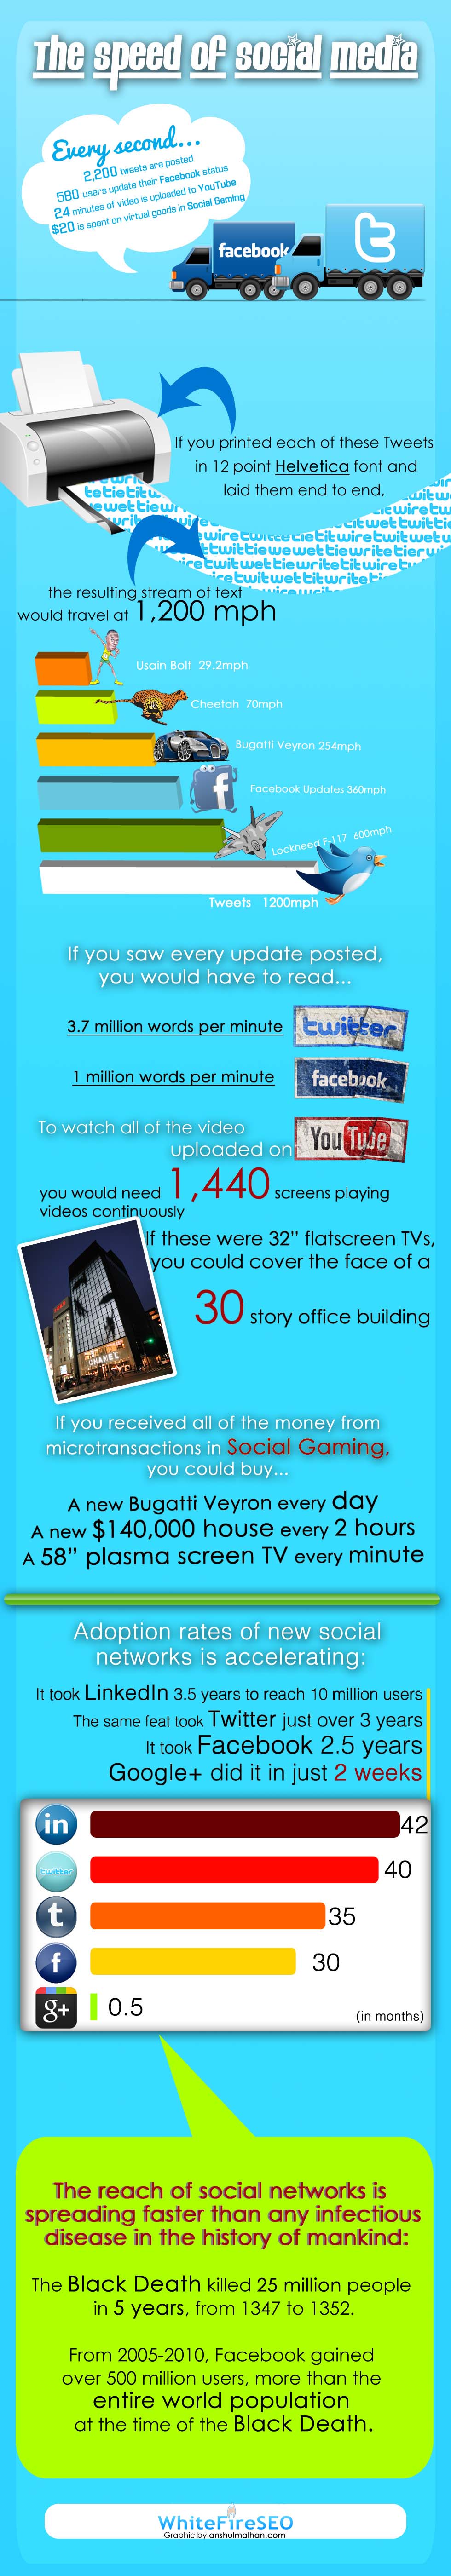 infographic about the the speed of social media